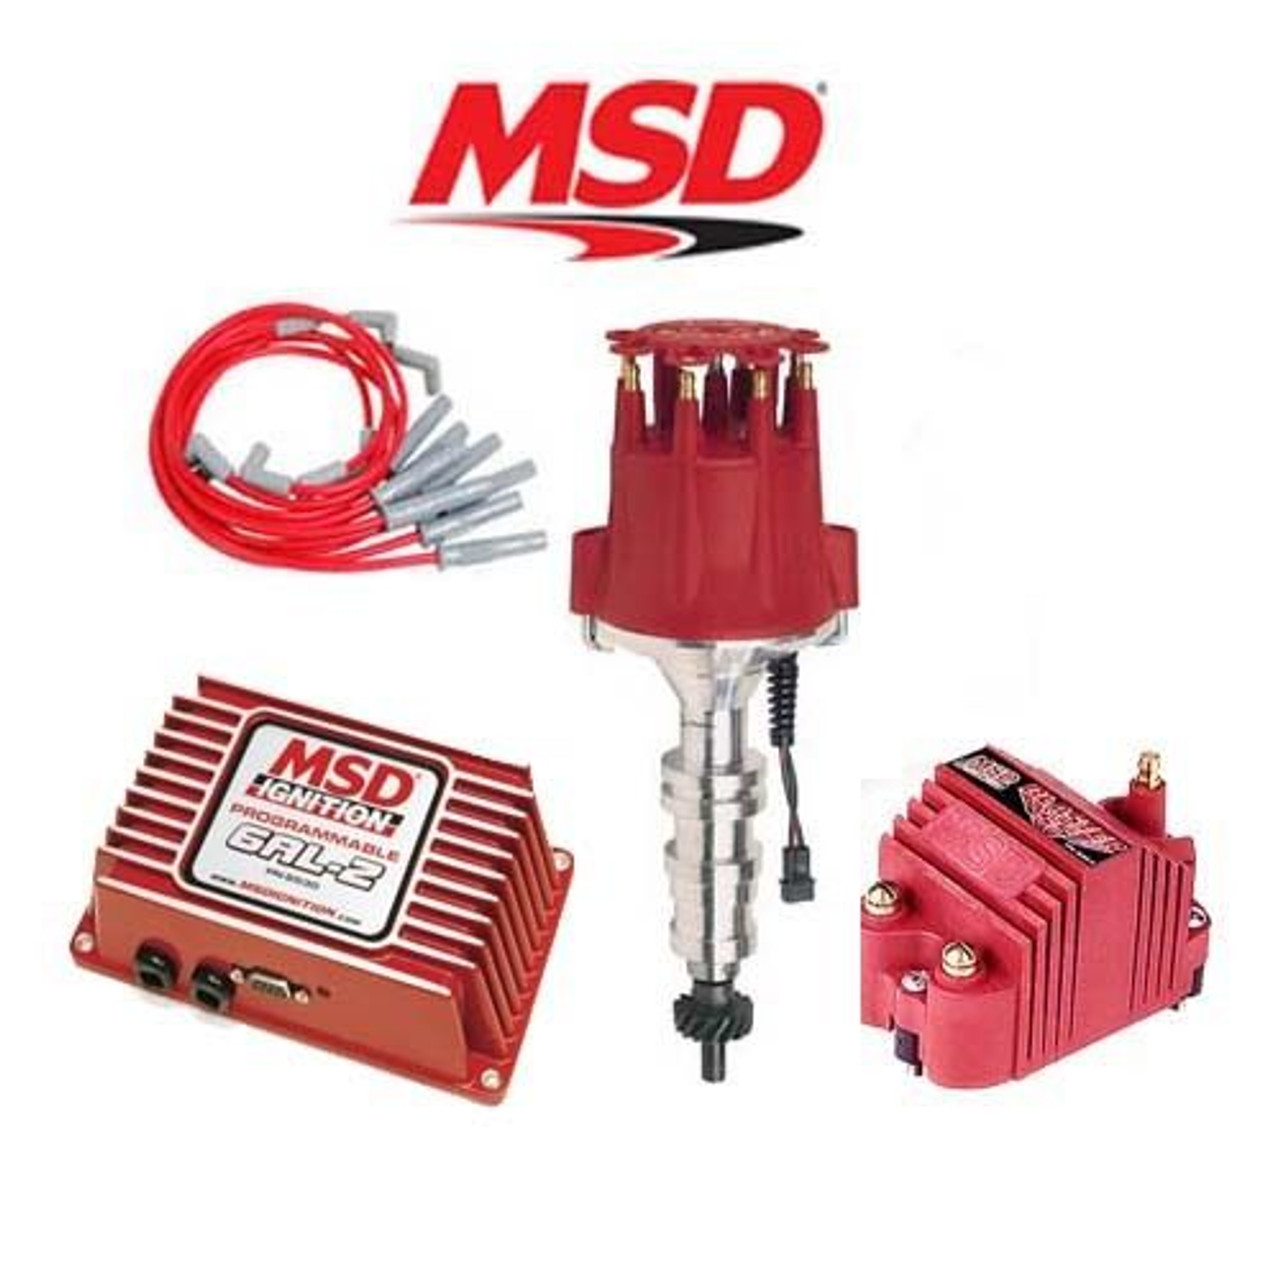 MSD 9275 Ignition Kit Programmable 6AL-2/Distributor/Wires Ford FE 390/427/428